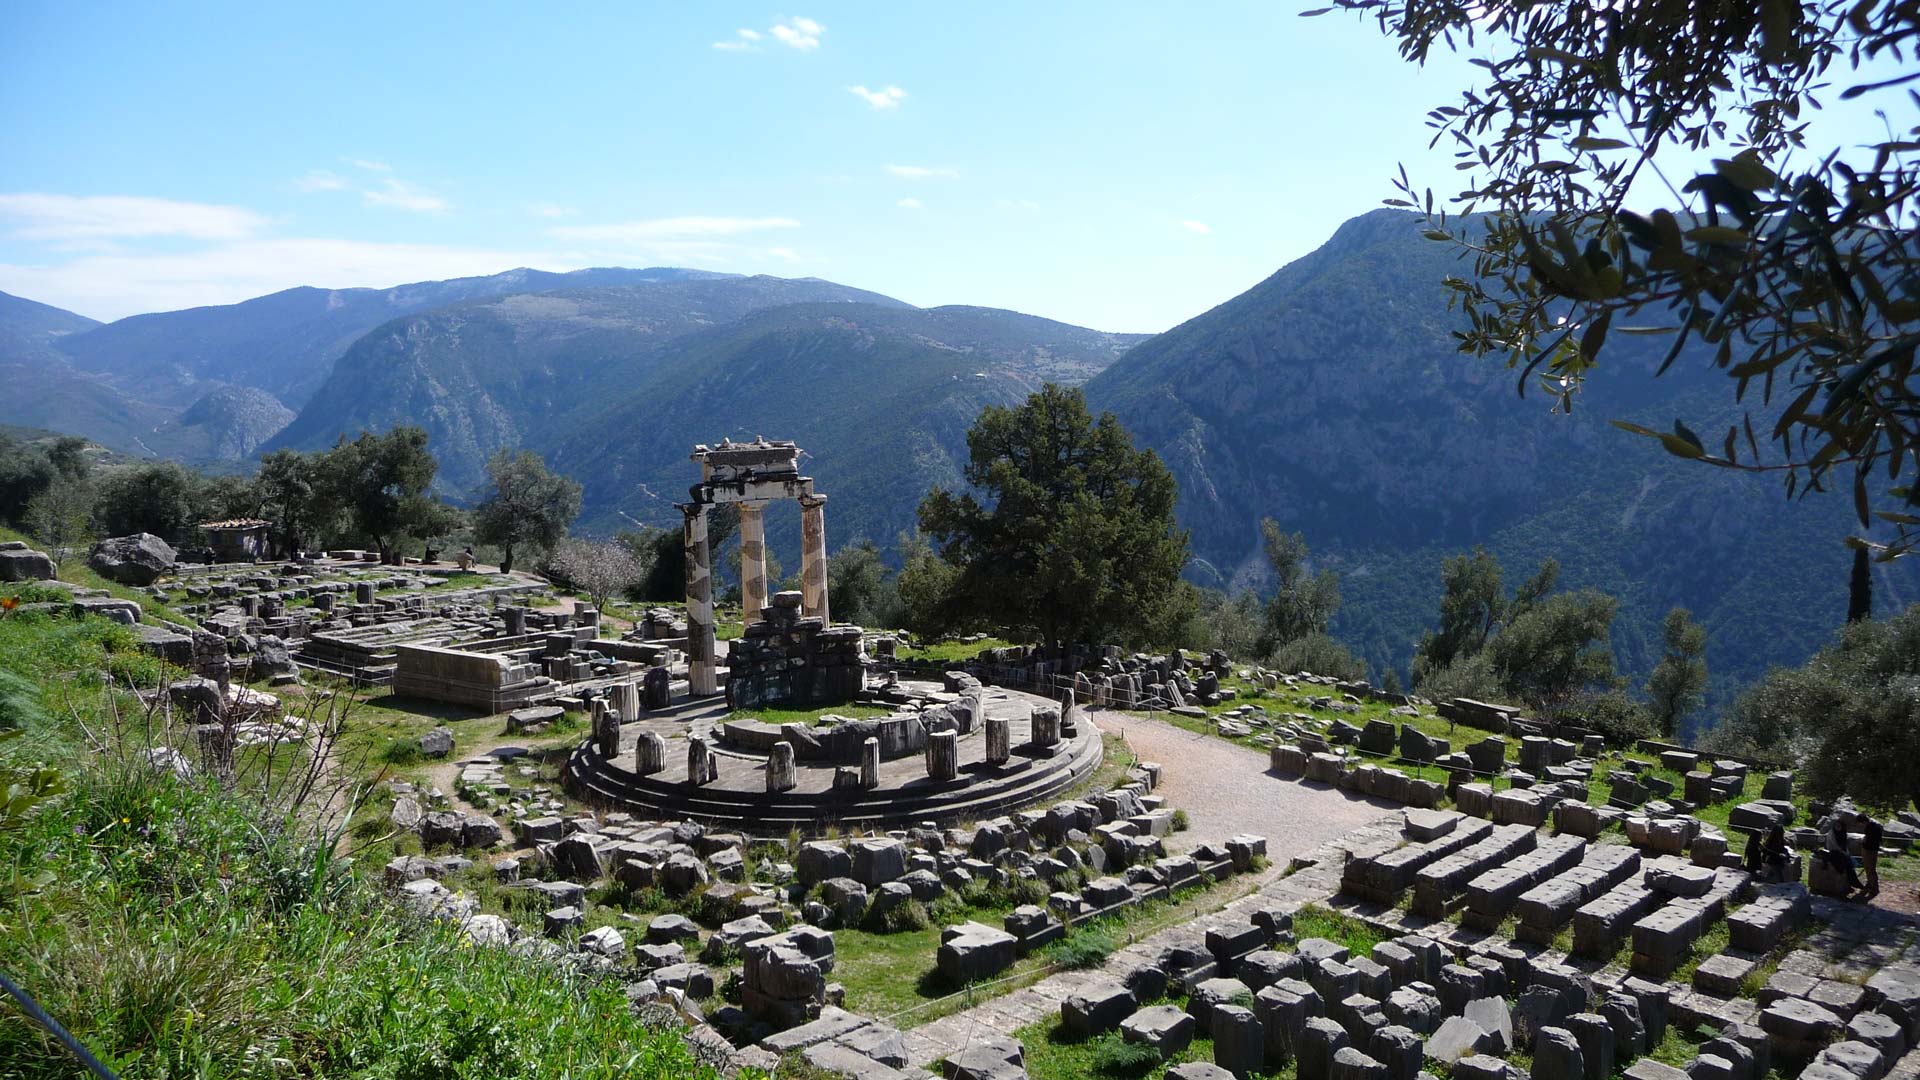 The Sanctuary of Athena Delphi, Greece - The Delphi Symposium seeks io respond to current global challenges by bringing together leading thinkers and explorers across  multi-disciplinary fields of religion, spirituality, psychology, and humanities in order to create a unifying  vision inspiring hope and collective action.